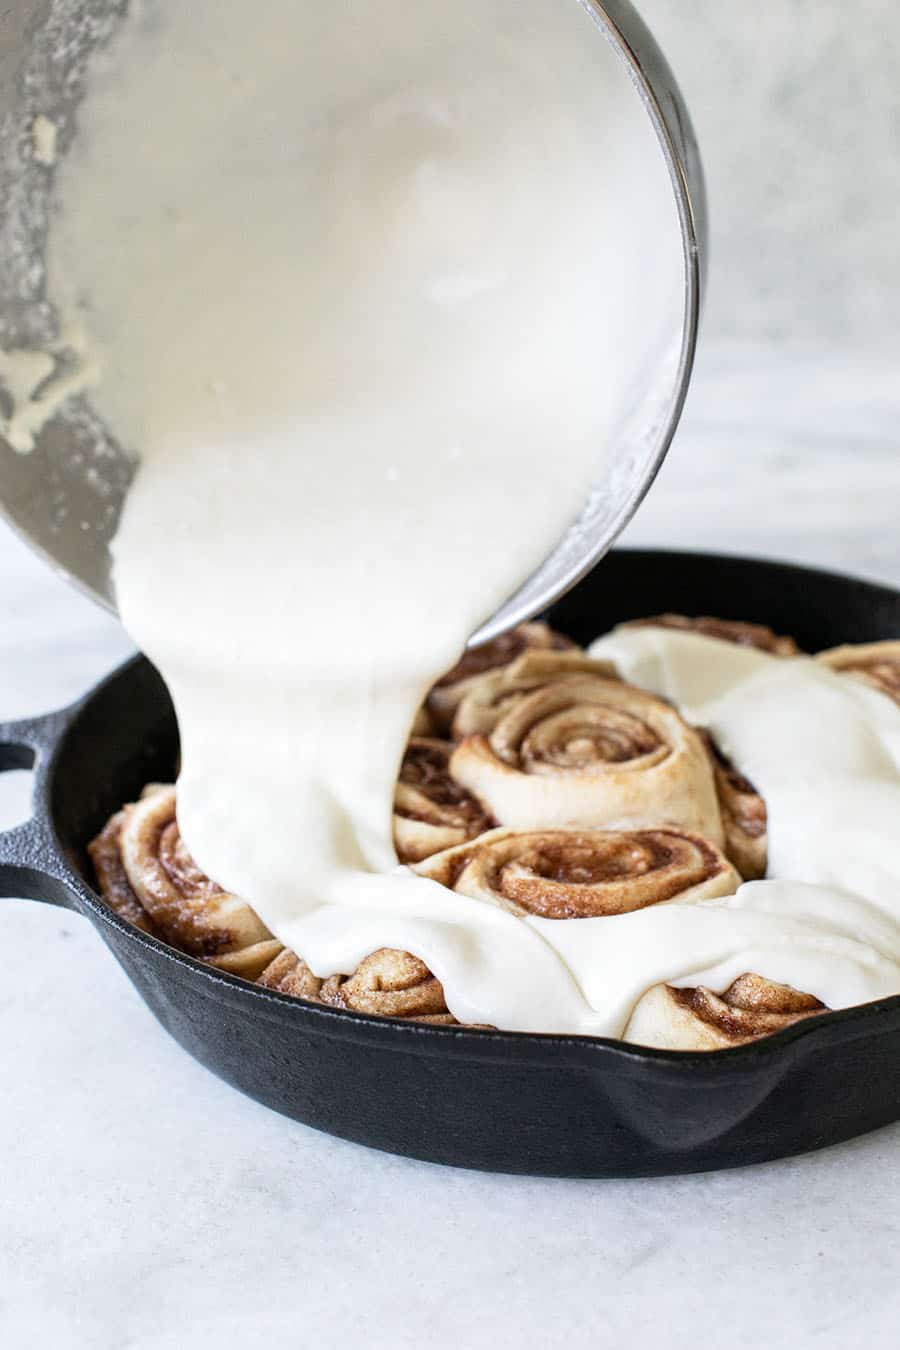 Glaze being poured over cinnamon rolls in a cast iron skillet